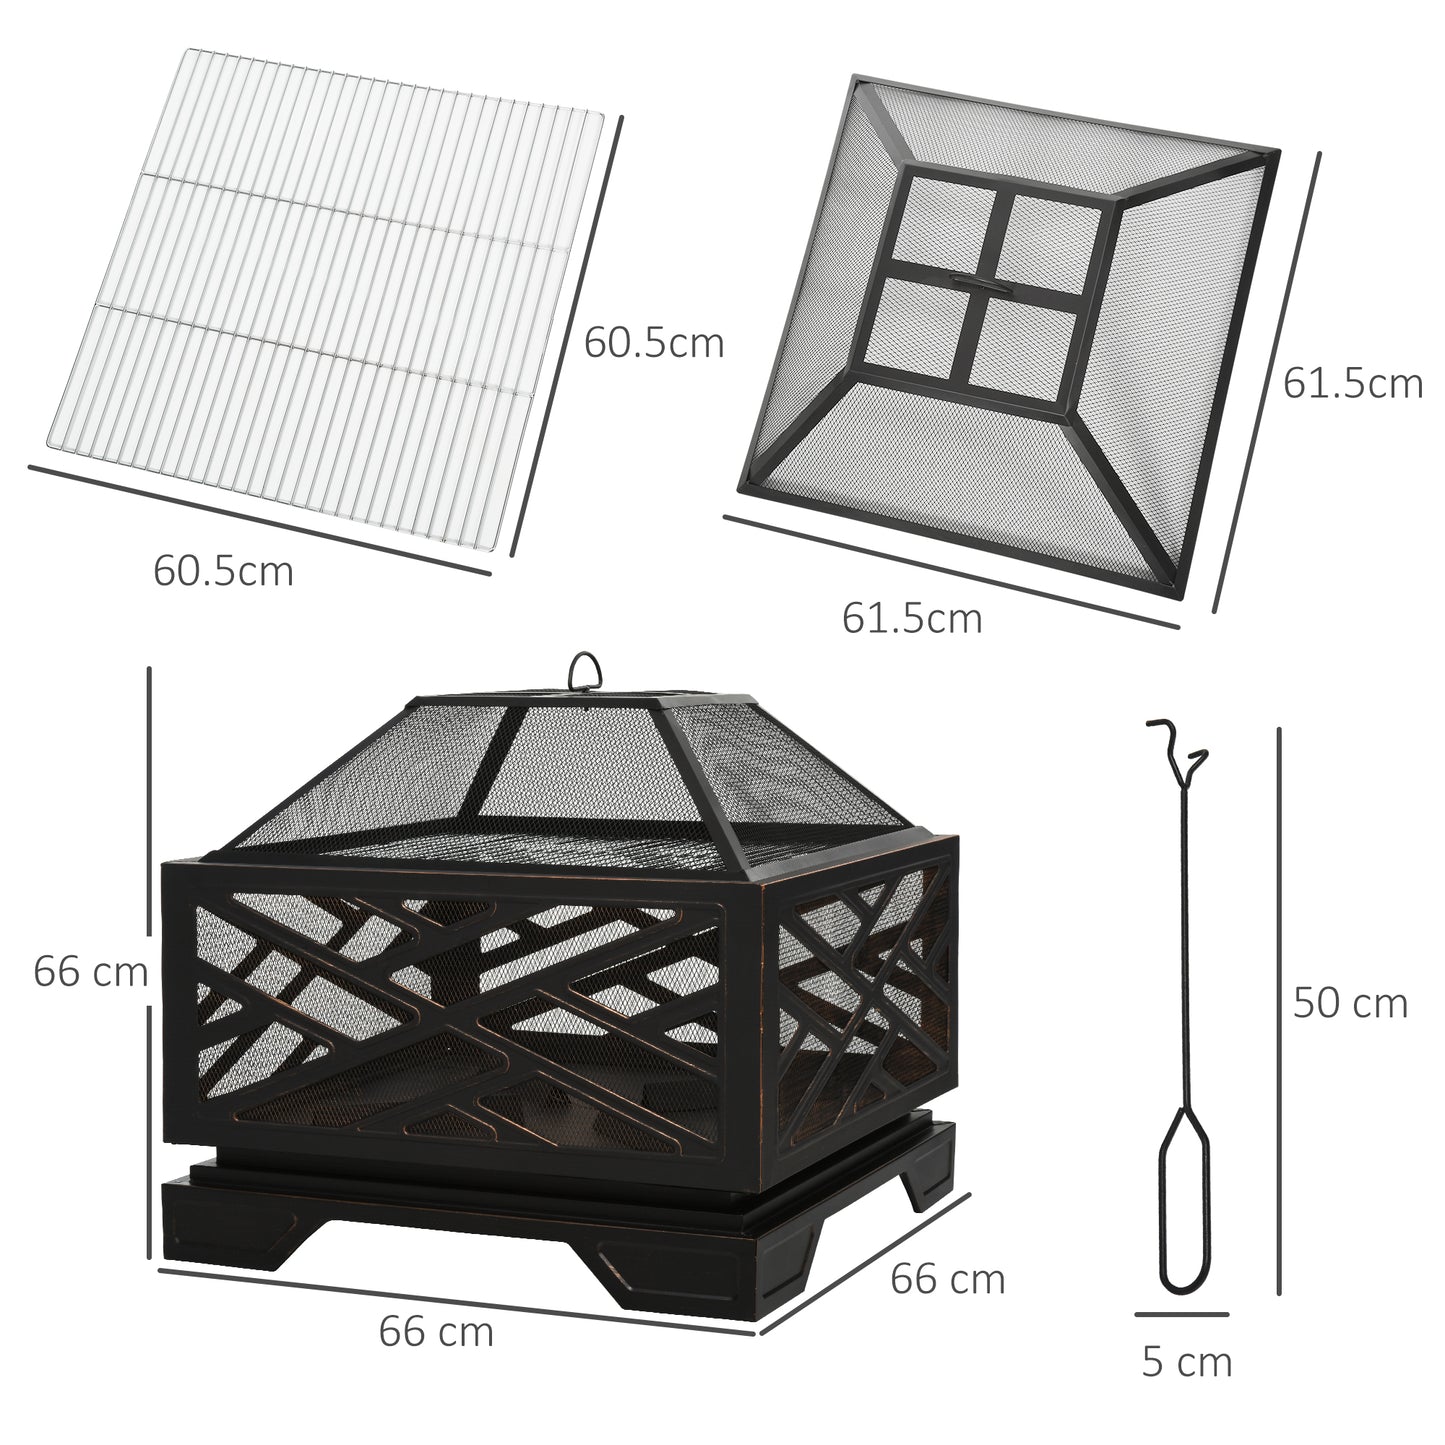 Outsunny 66cm 2 in 1 Square Fire Pit Metal Brazier for Garden, Patio with BBQ Grill Shelf & Spark Screen Cover & Poker, Black